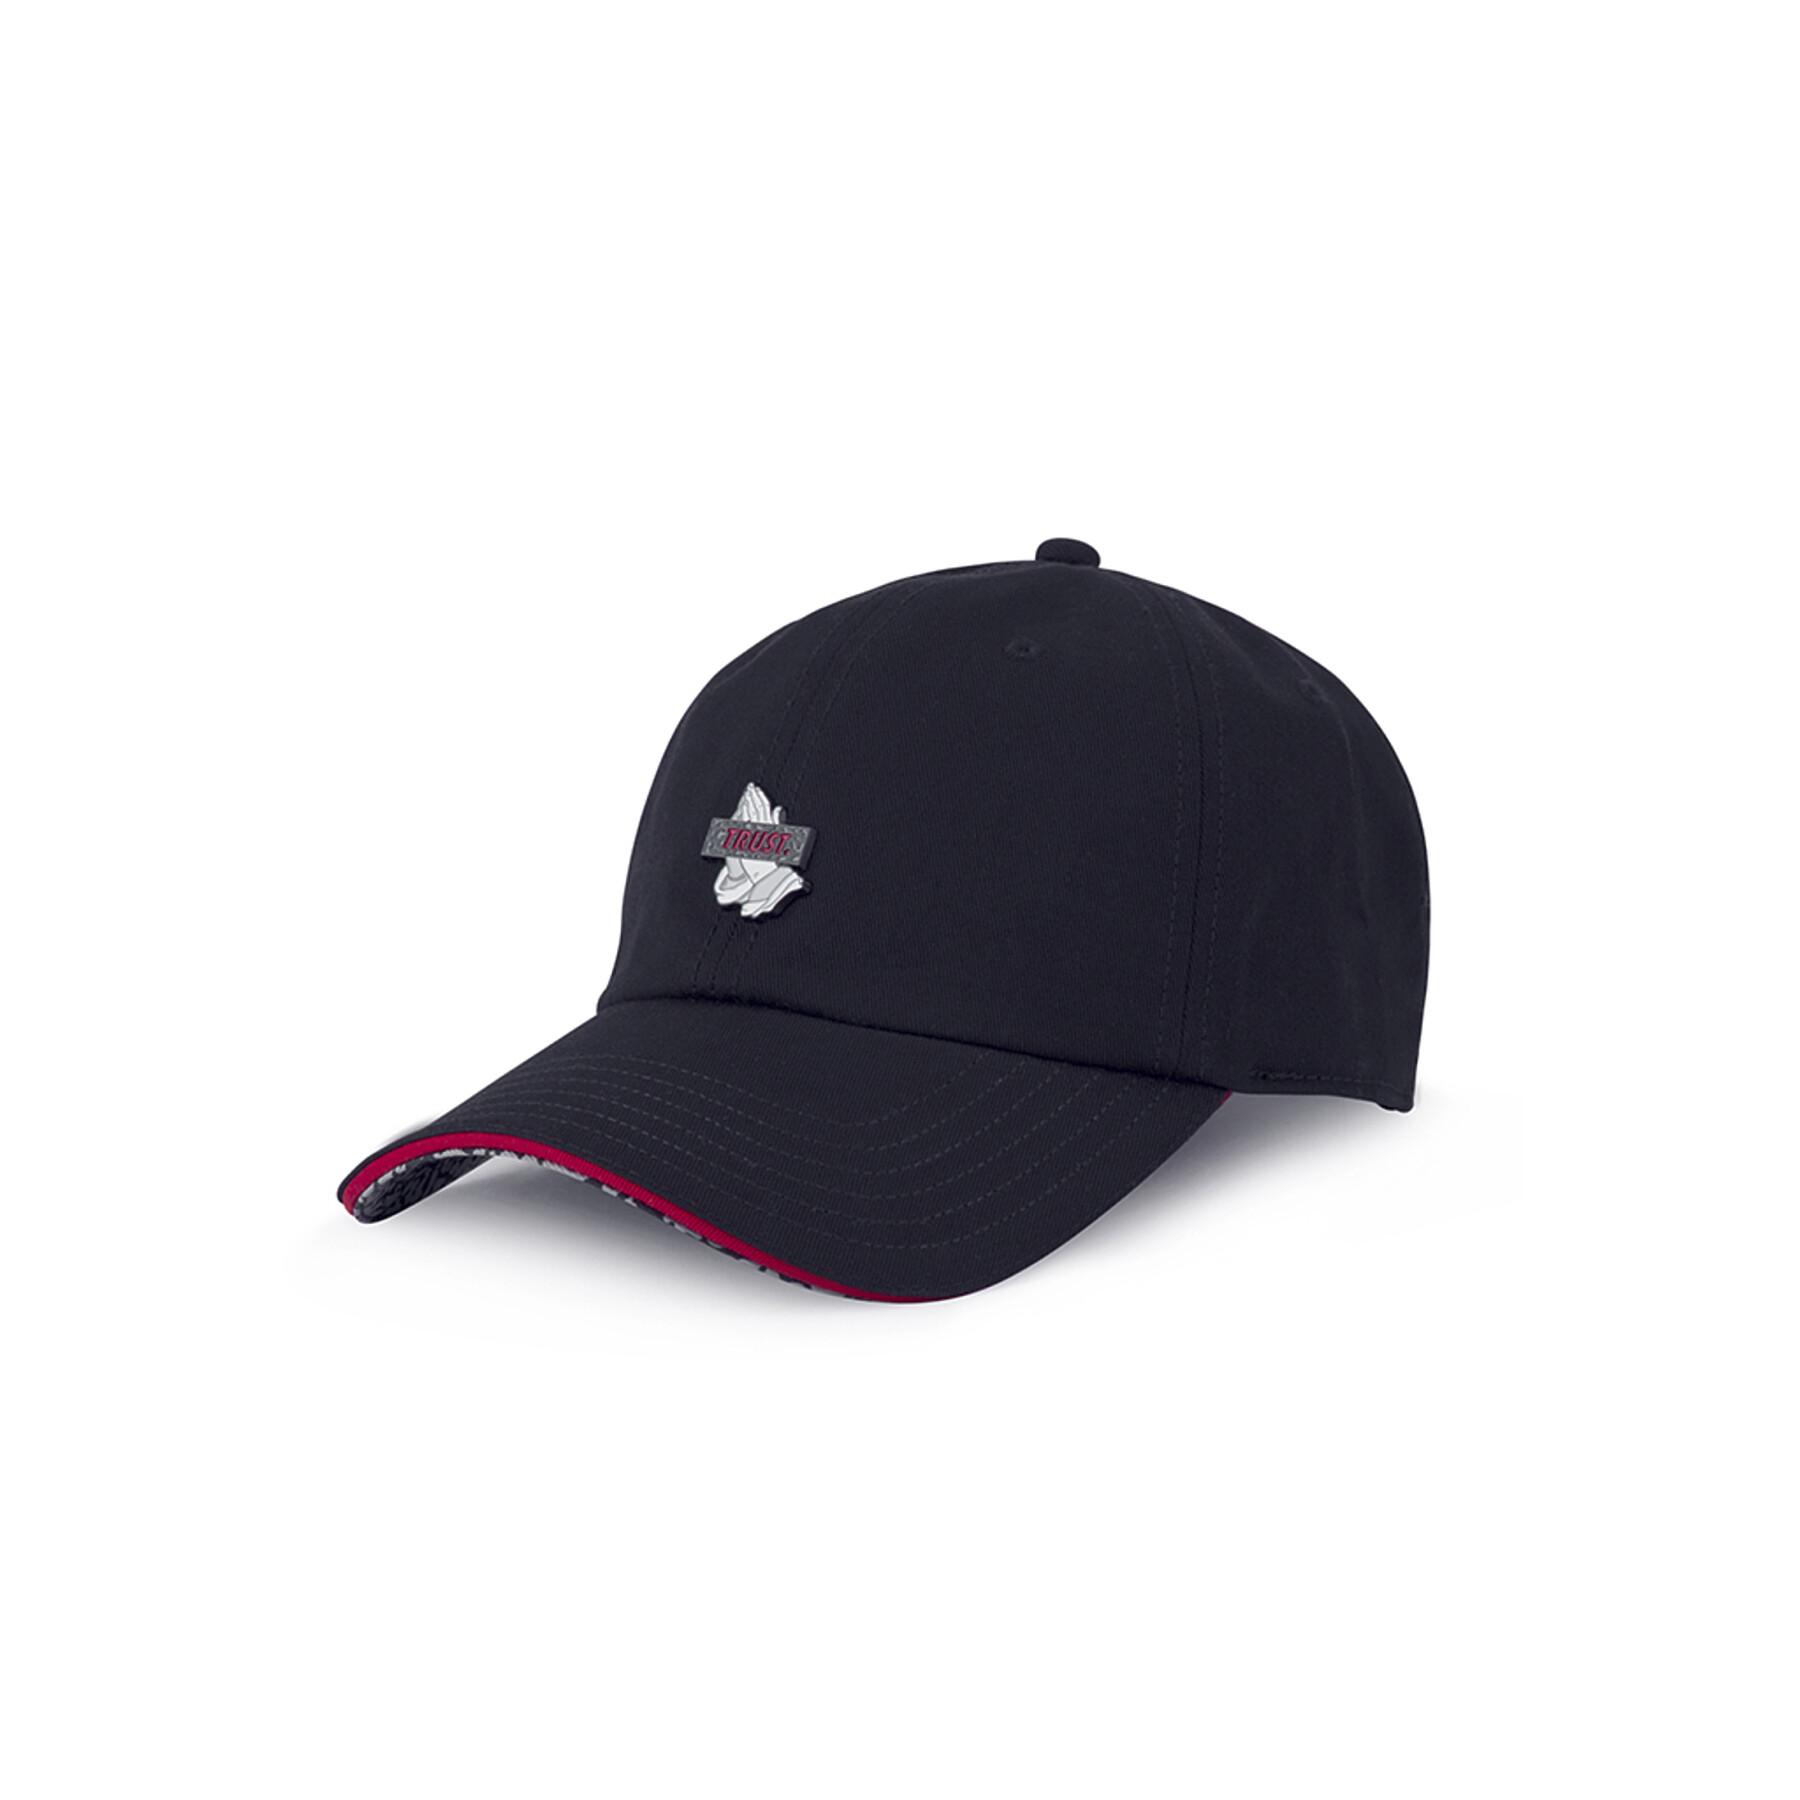 Casquette Cayler&Sons Jay curved